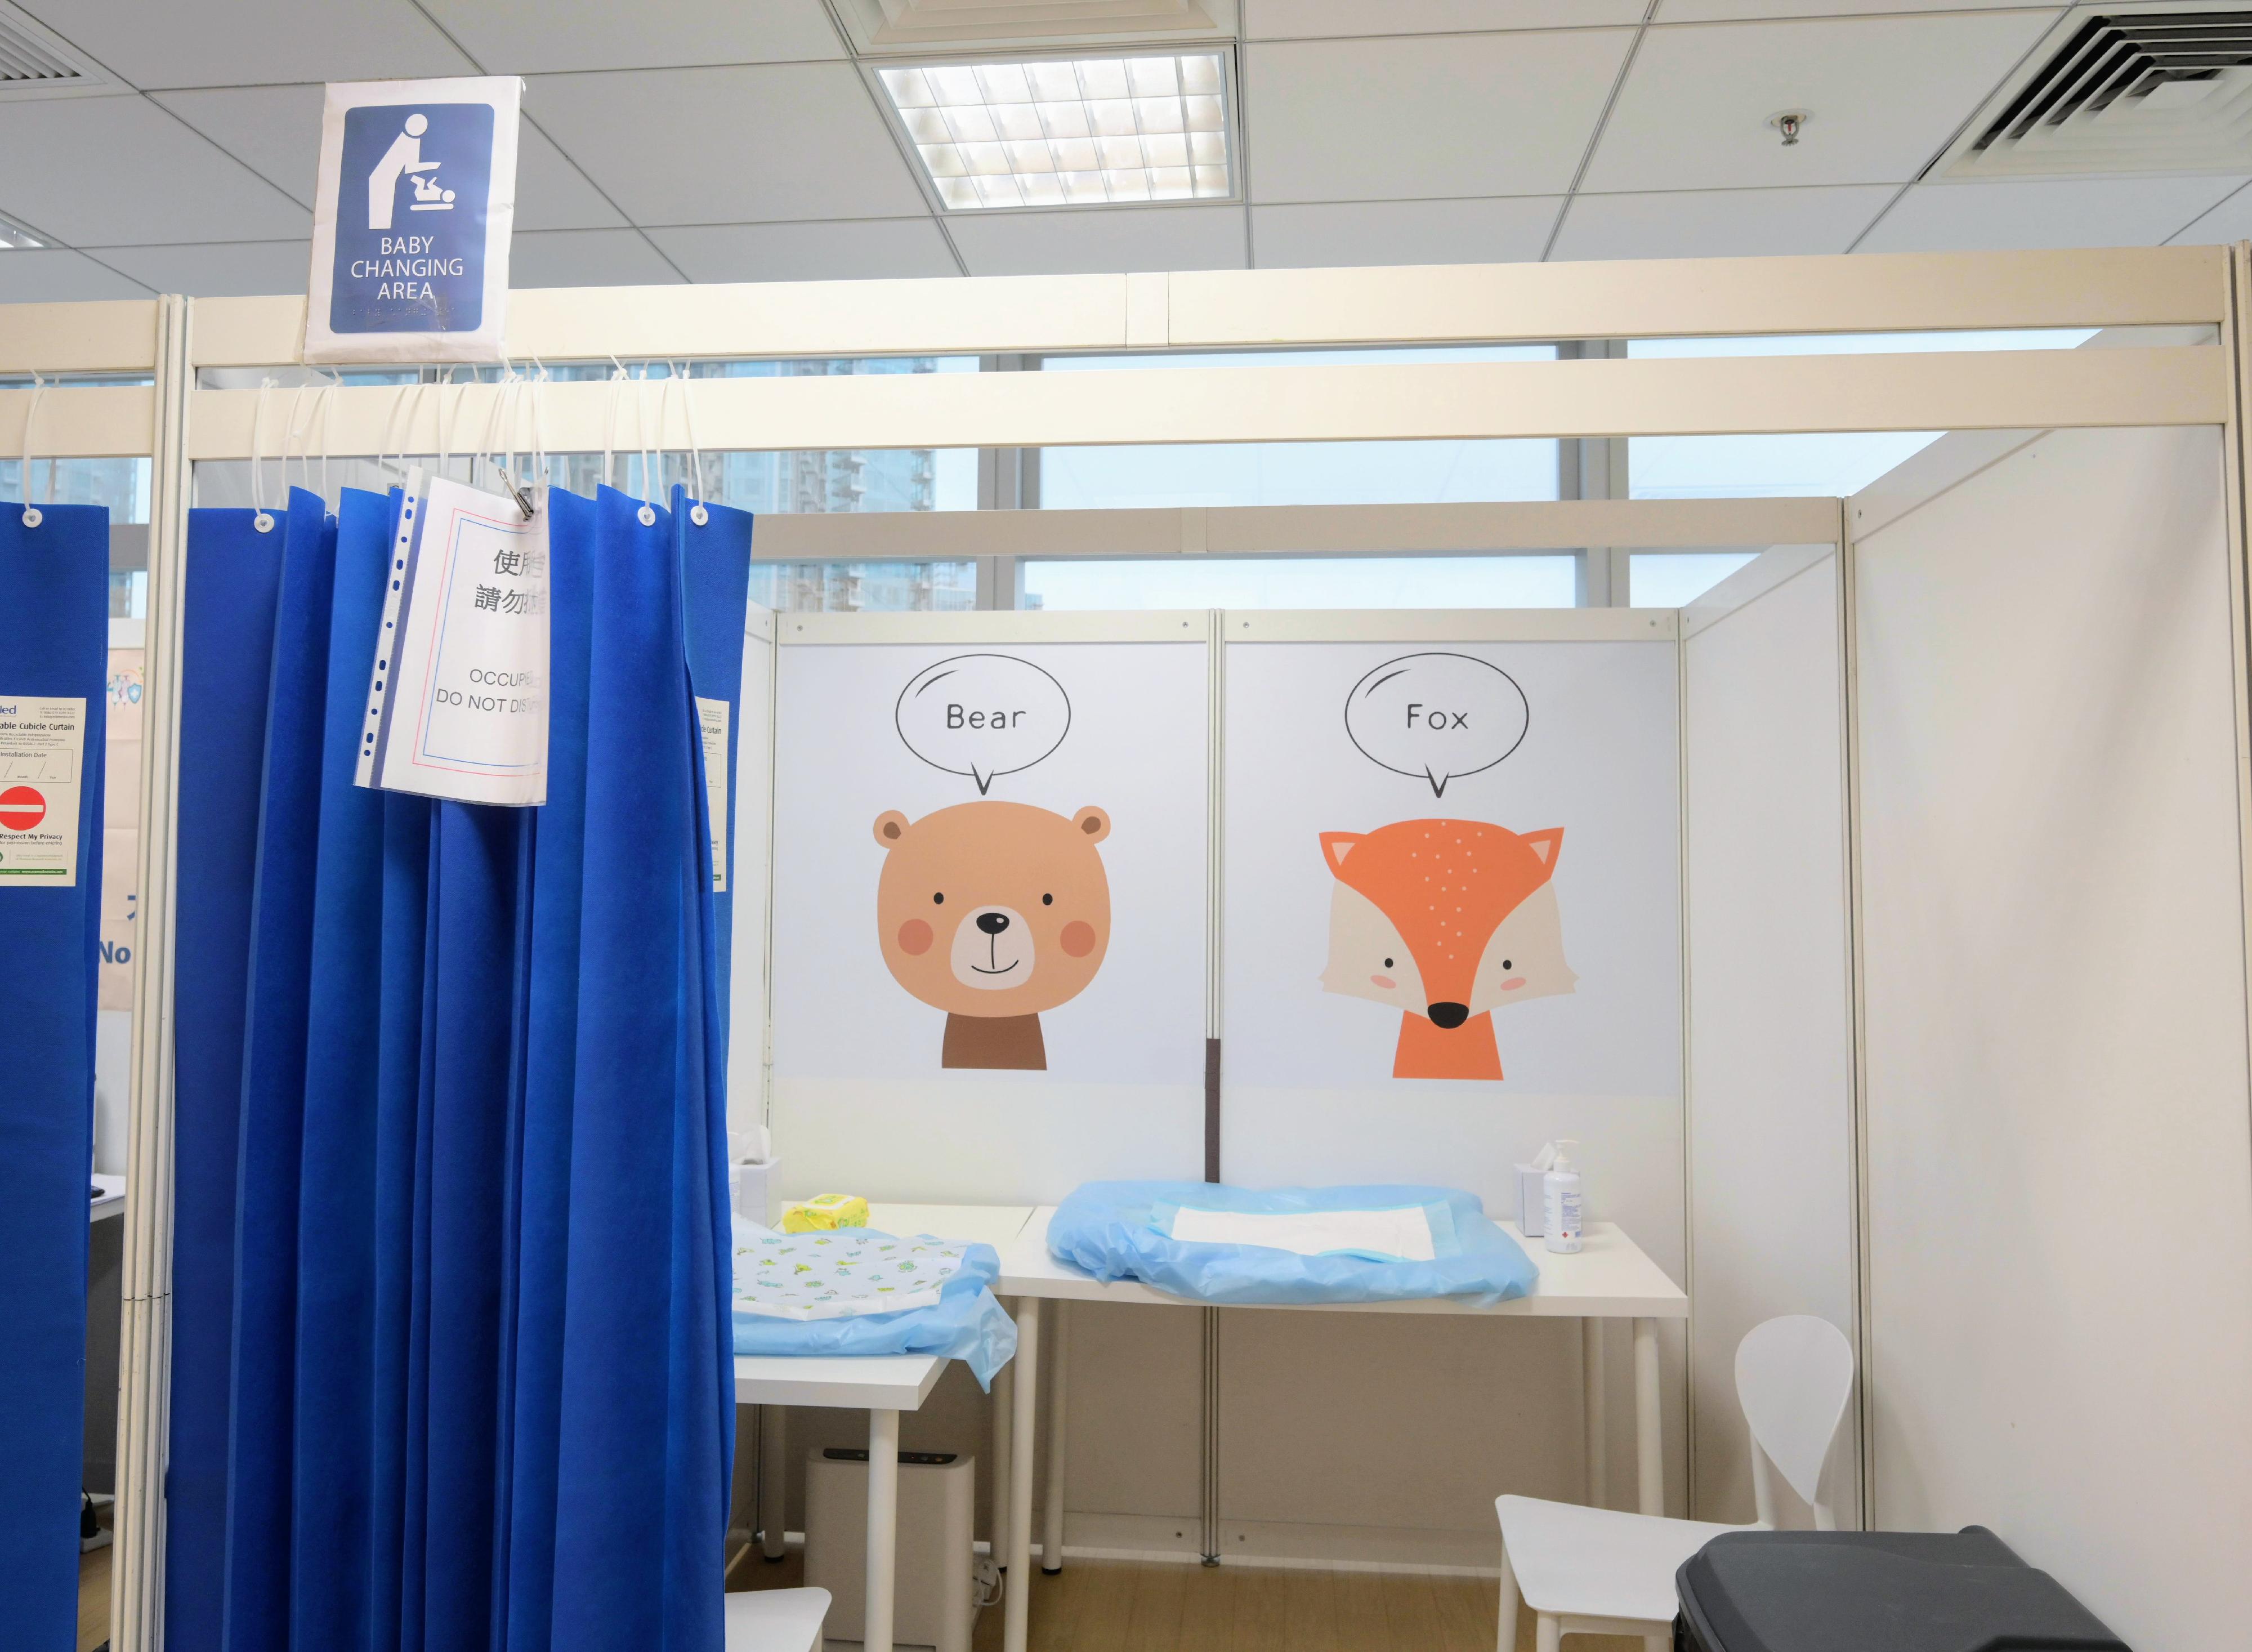 Children aged from 6 months to 3 years may receive the Sinovac vaccine starting from today (August 4). In order to let children receive vaccination in a more relaxing environment, five Community Vaccination Centres (CVCs) providing the Sinovac vaccine have retrofitted some vaccination booths specifically for children and decorated them with stickers of animal cartoons. Photo shows a diaper changing room set up at a CVC in Kwun Tong for parents' use when necessary.